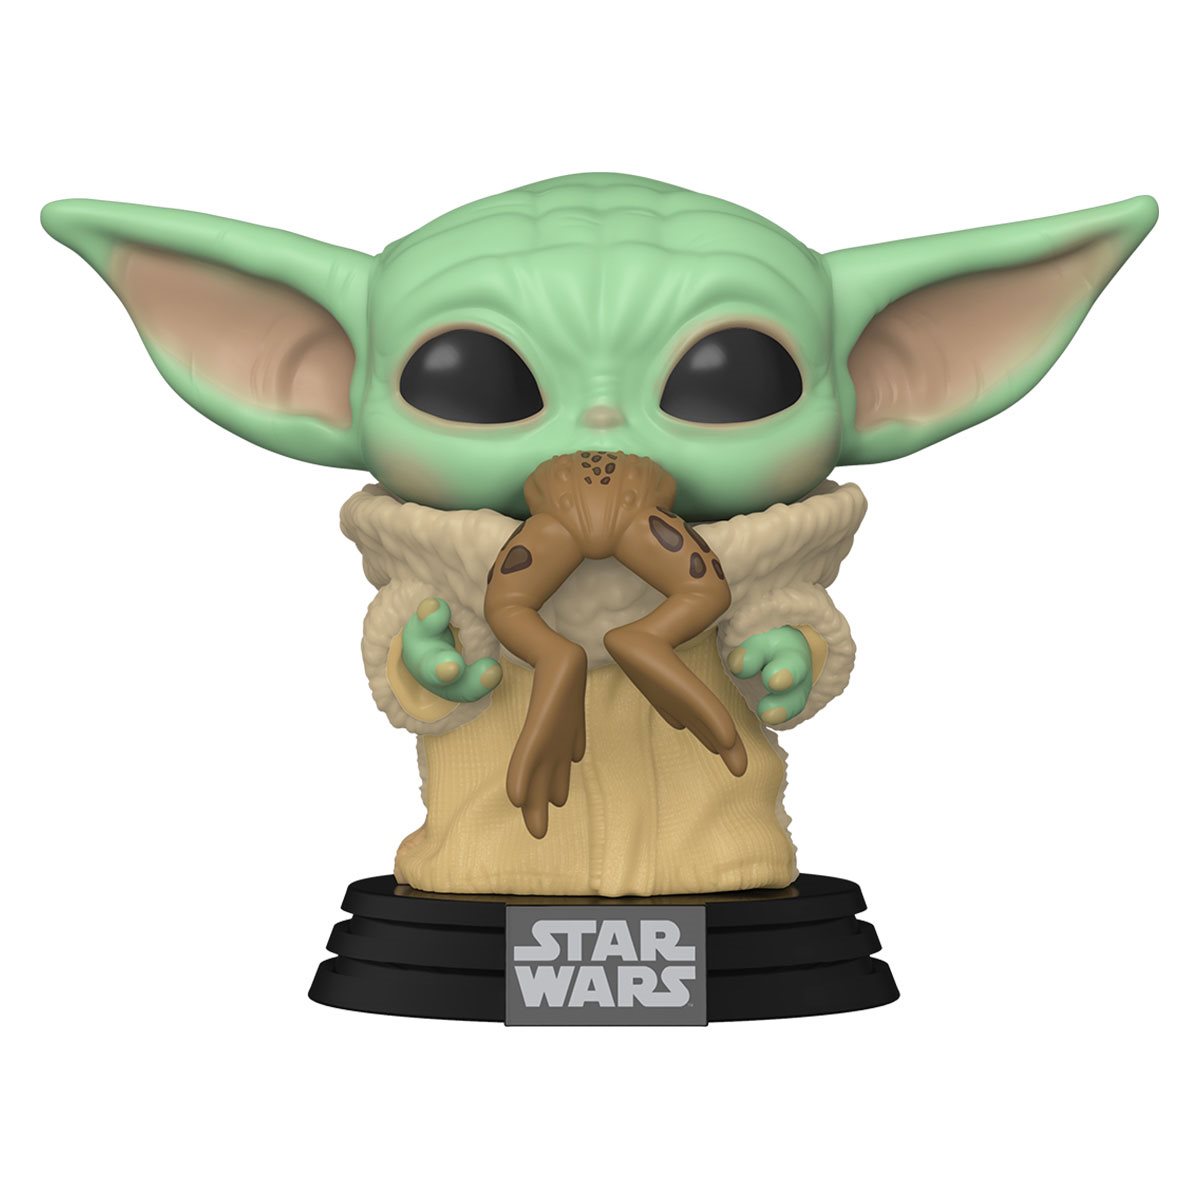 Star Wars: The Mandalorian The Child with Frog Vinyl Figure By Funko Pop!